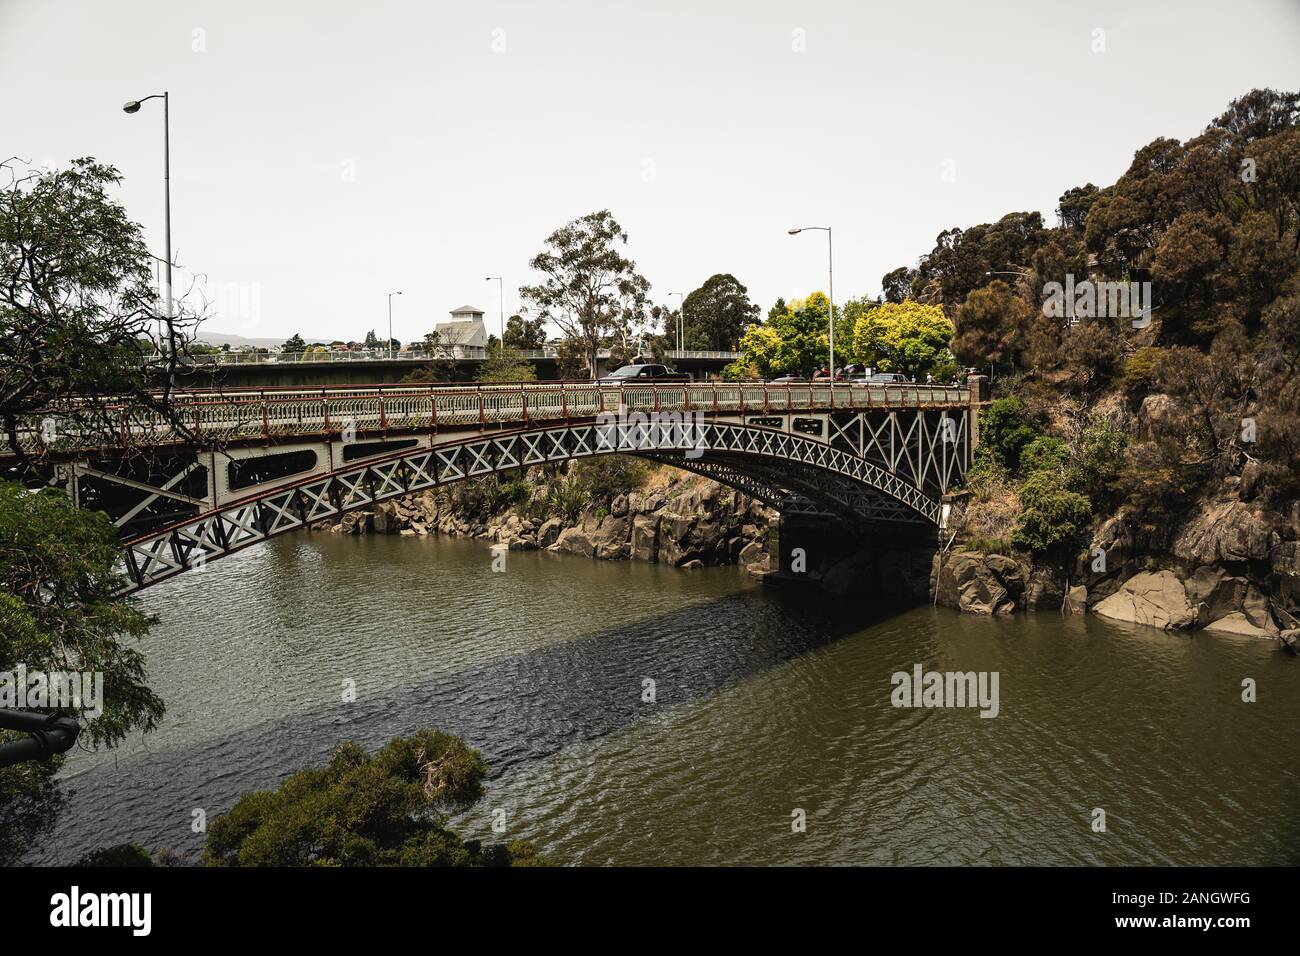 Launceston, Tasmania - January 3rd 2020: Looking at the Kings Bridge and the South Esk River taken from the Cataract Gorge walk. Stock Photo